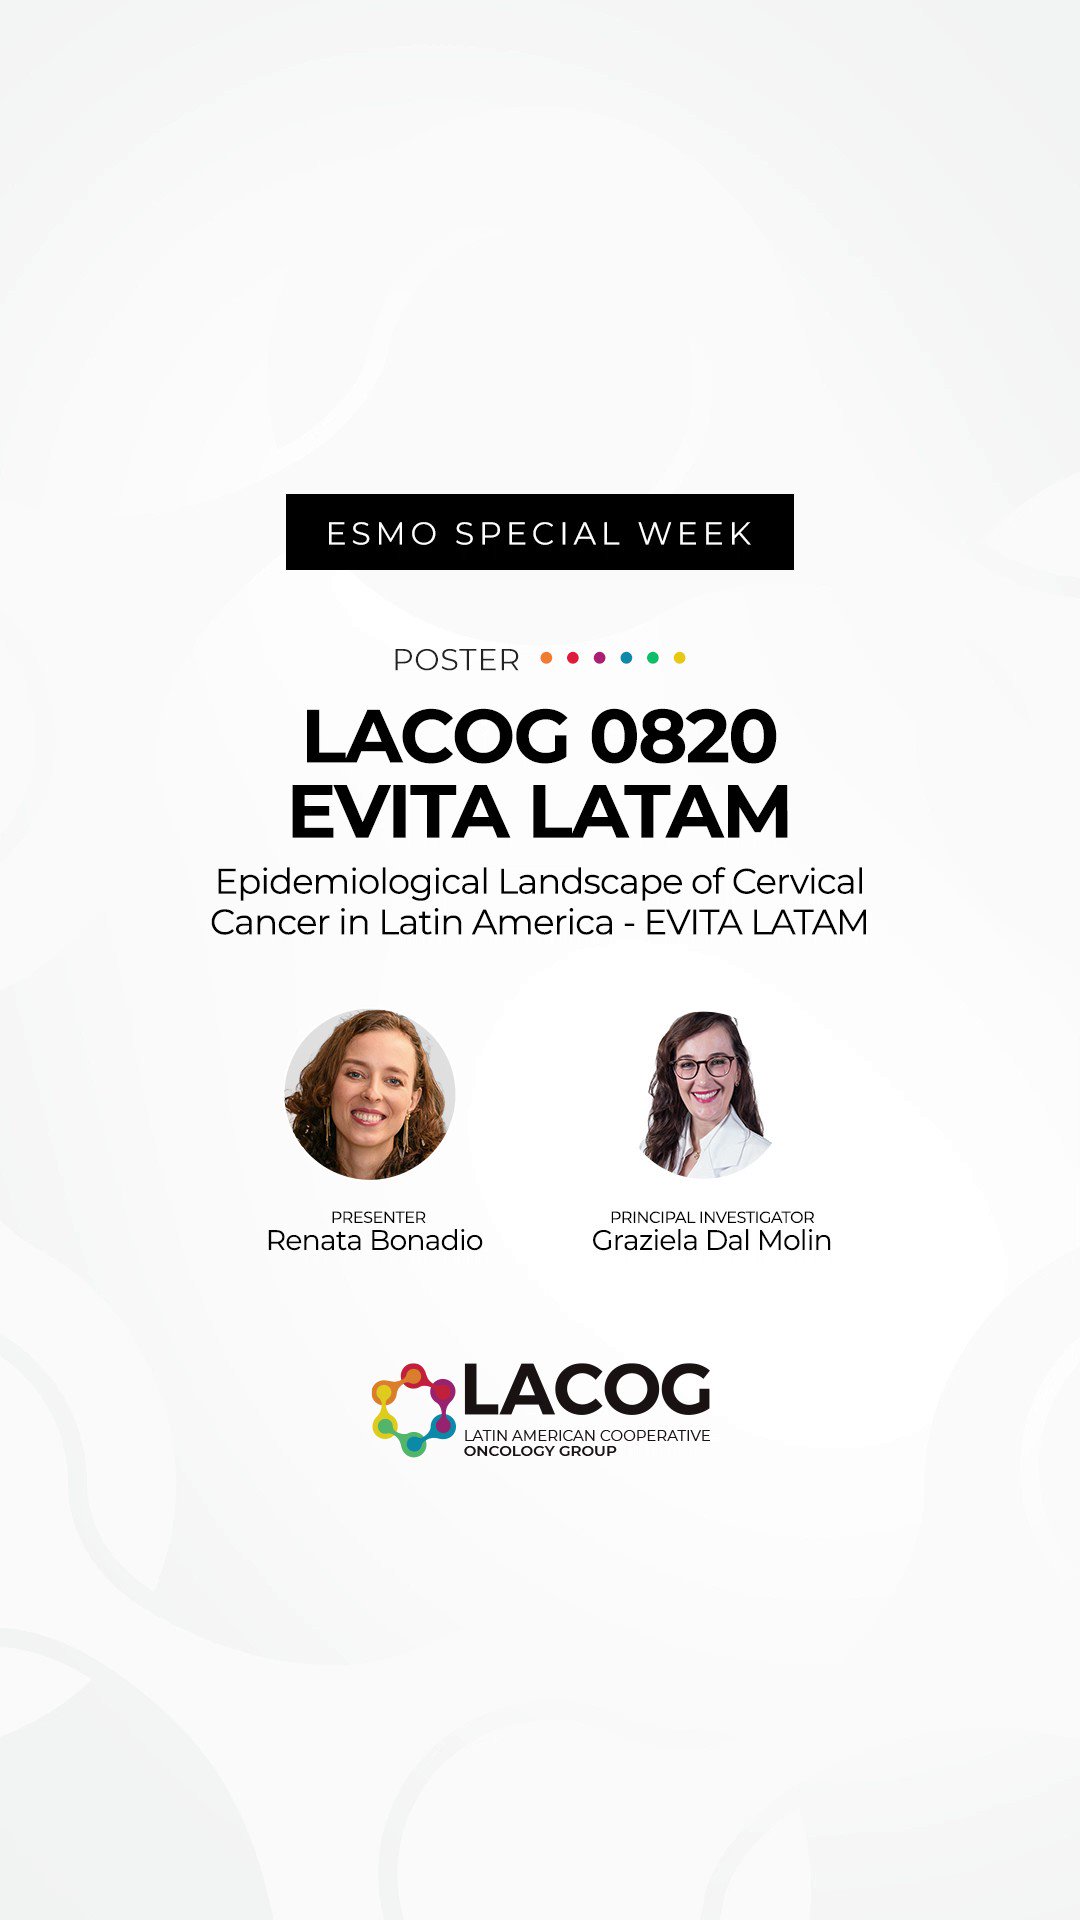 LACOG - Latin American Cooperative Oncology Group on X: Inscreva